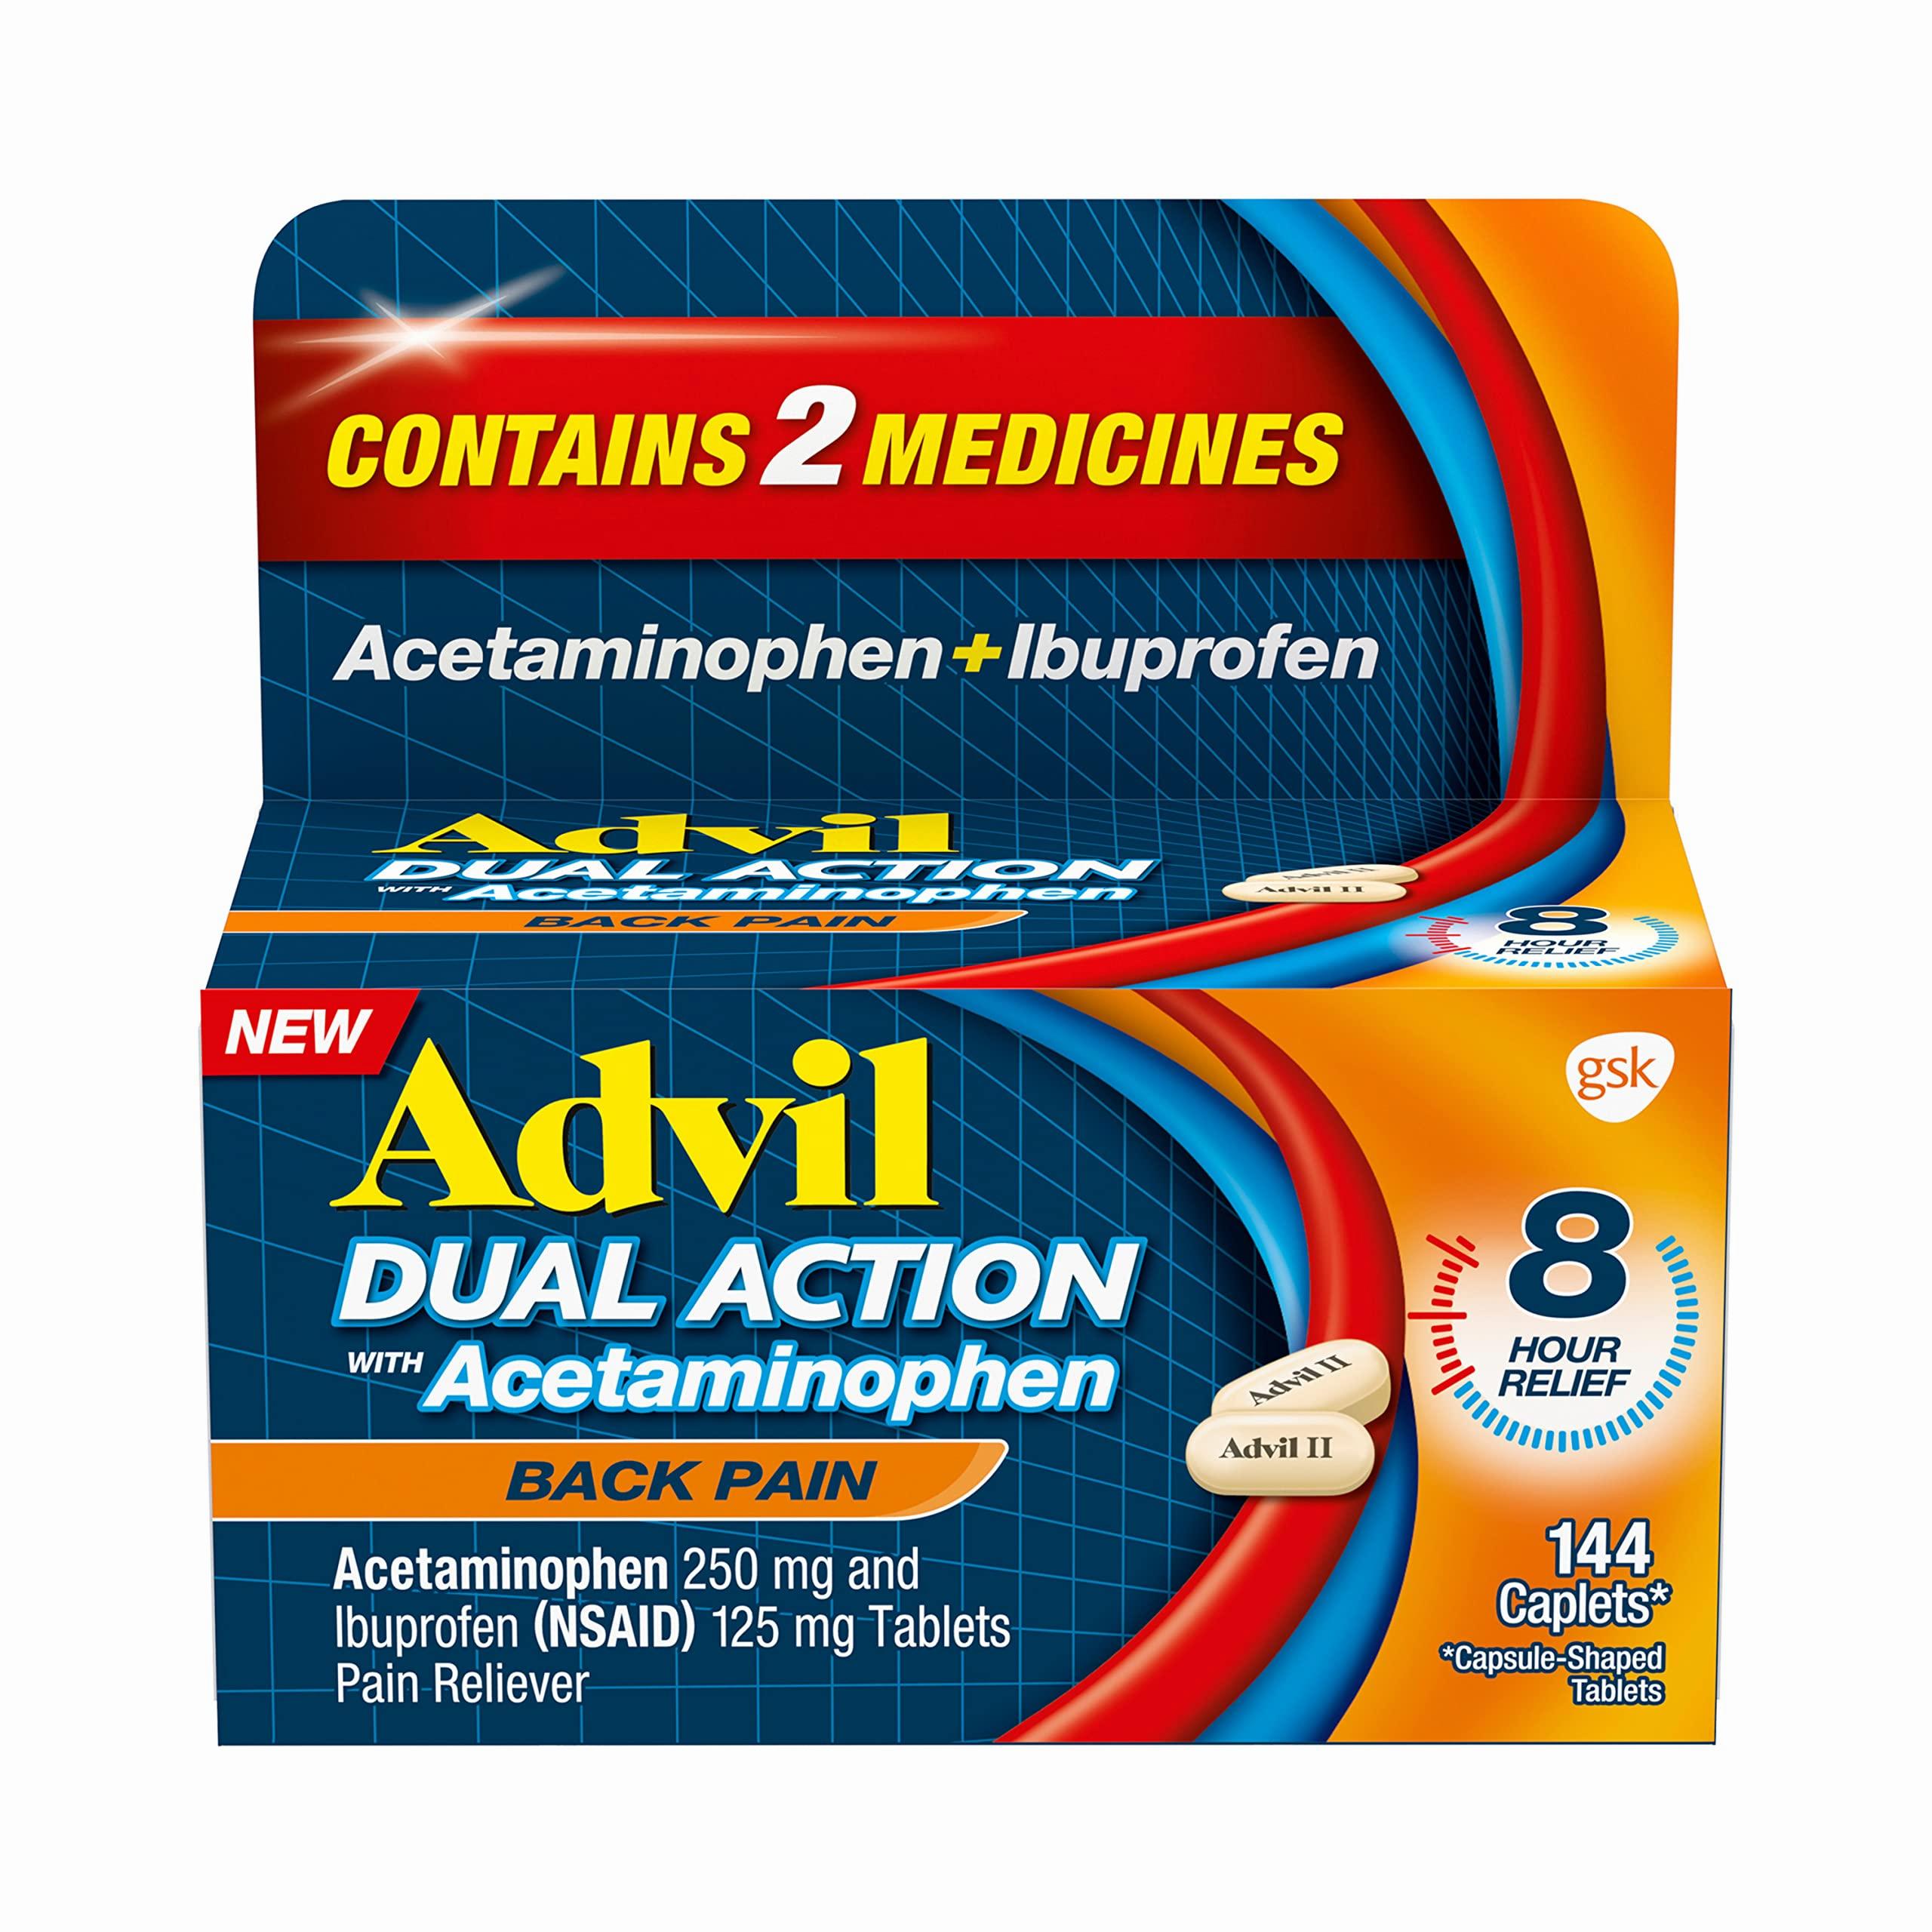 A box of Advil Dual Action caplets, which contain acetaminophen and ibuprofen to relieve back pain.